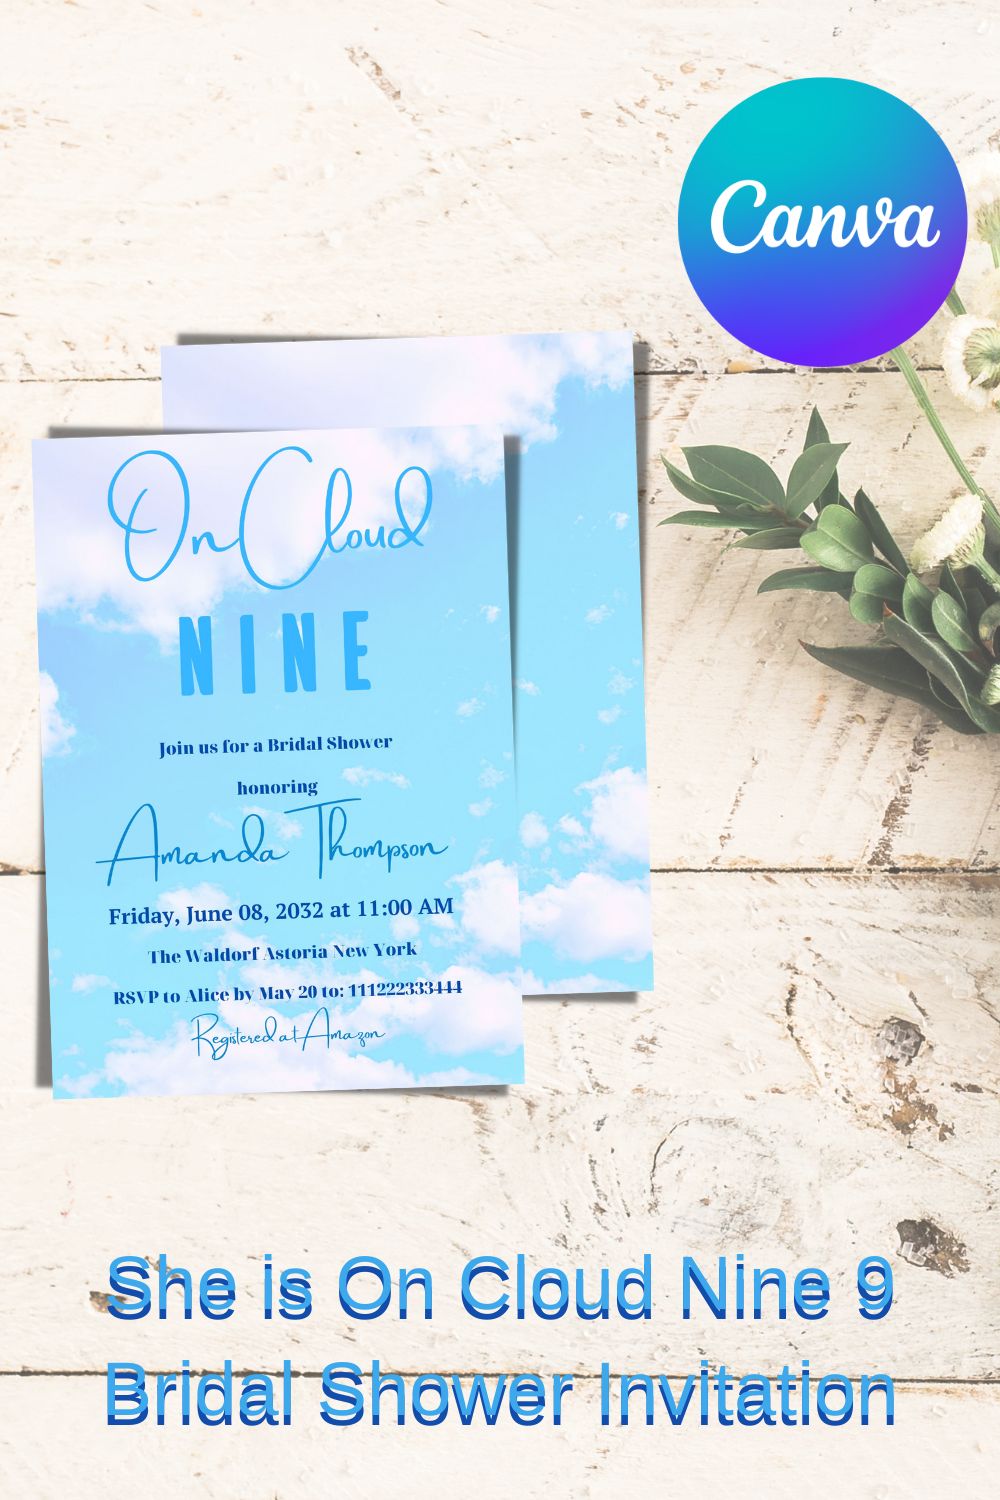 She is On Cloud Nine 9 Bridal Shower Invitation Tamplate pinterest preview image.